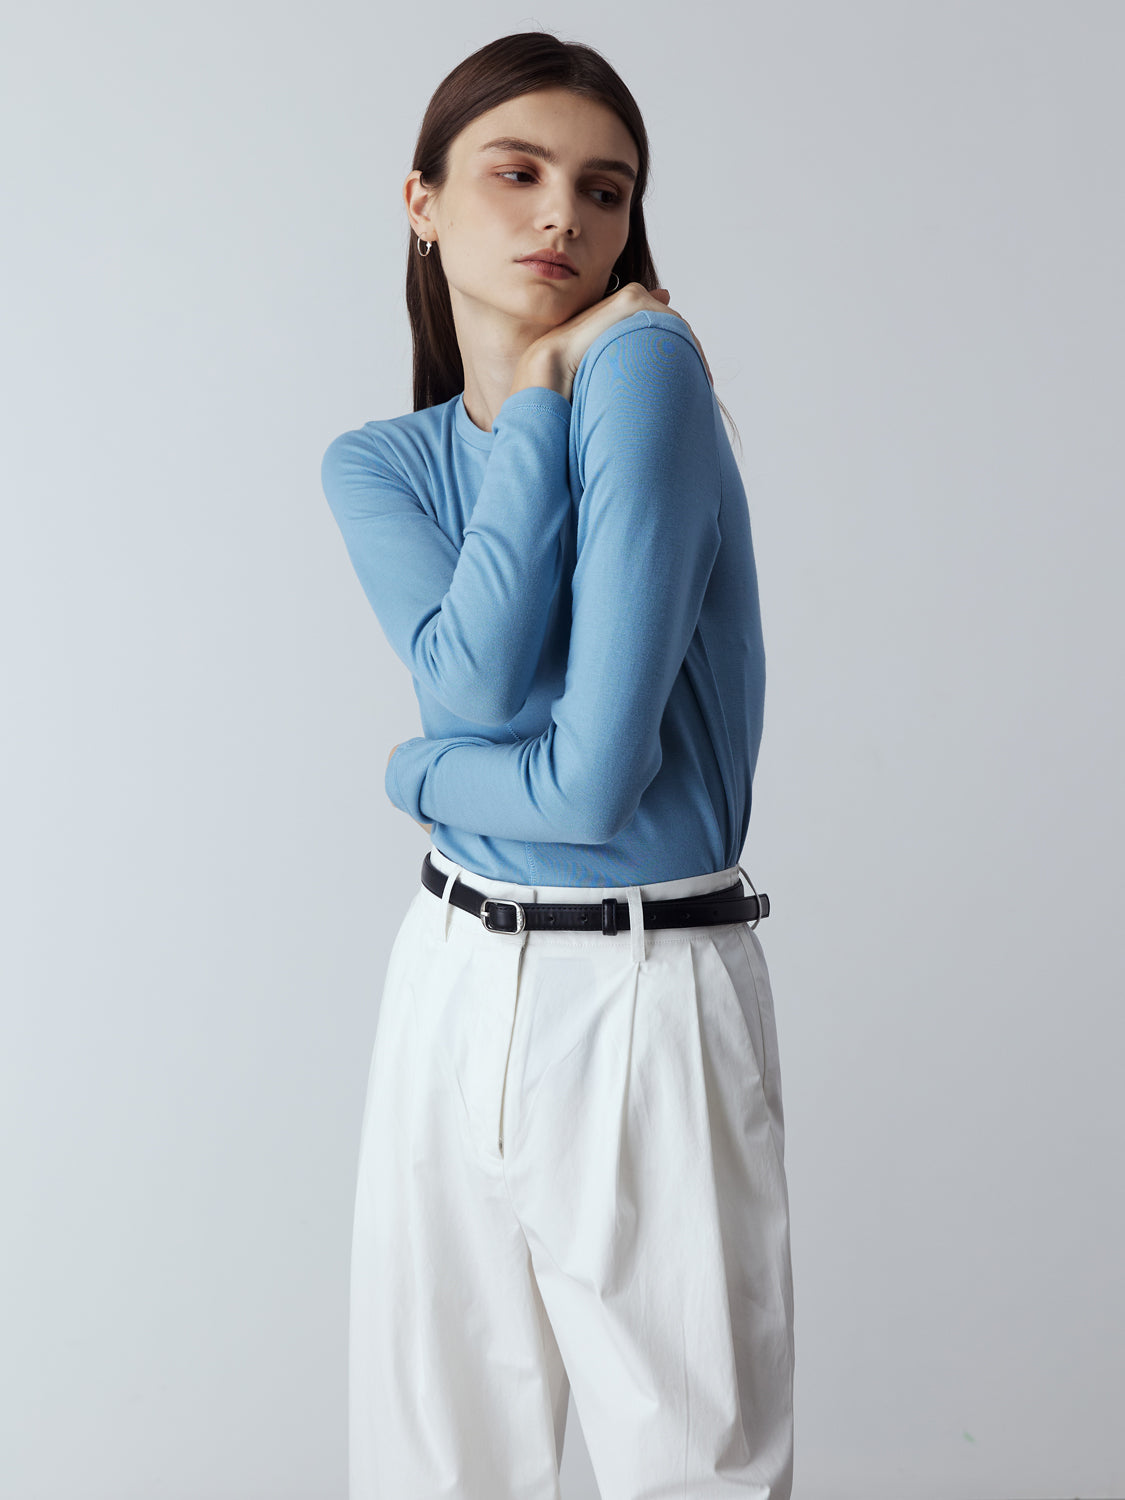 Blue : Model is wearing the Fitted Long Sleeve T-Shirt in Blue, which comes with a rounded crew neckline and a centre front stitch line. Arm-hugging but gives a relaxed bodice. Worn with Cotton Tailored Trousers in White and metallic silver heels.